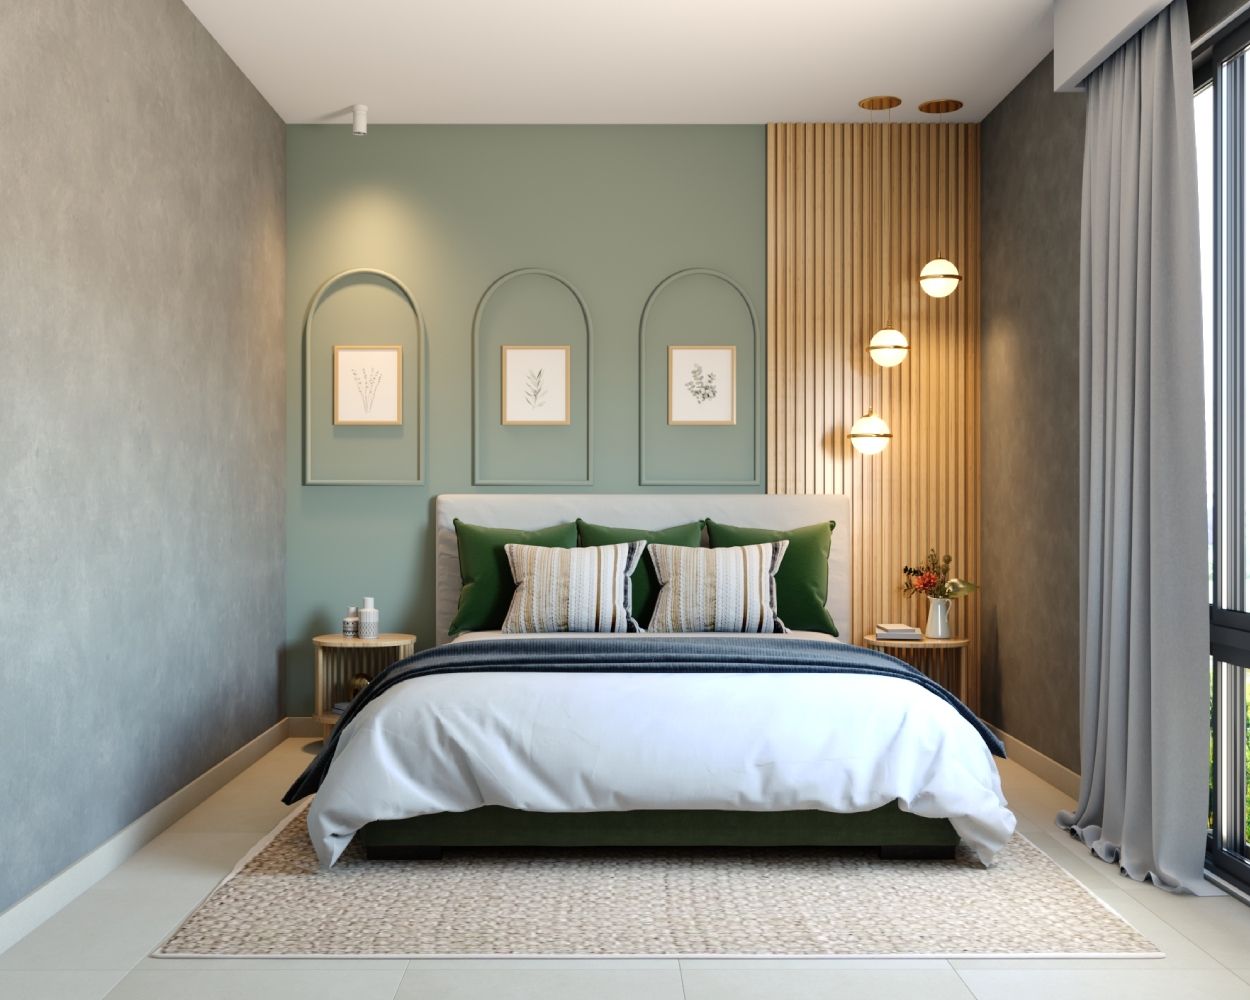 Modern Master Bedroom Design With Light Green Accent Wall And Fluted Panels